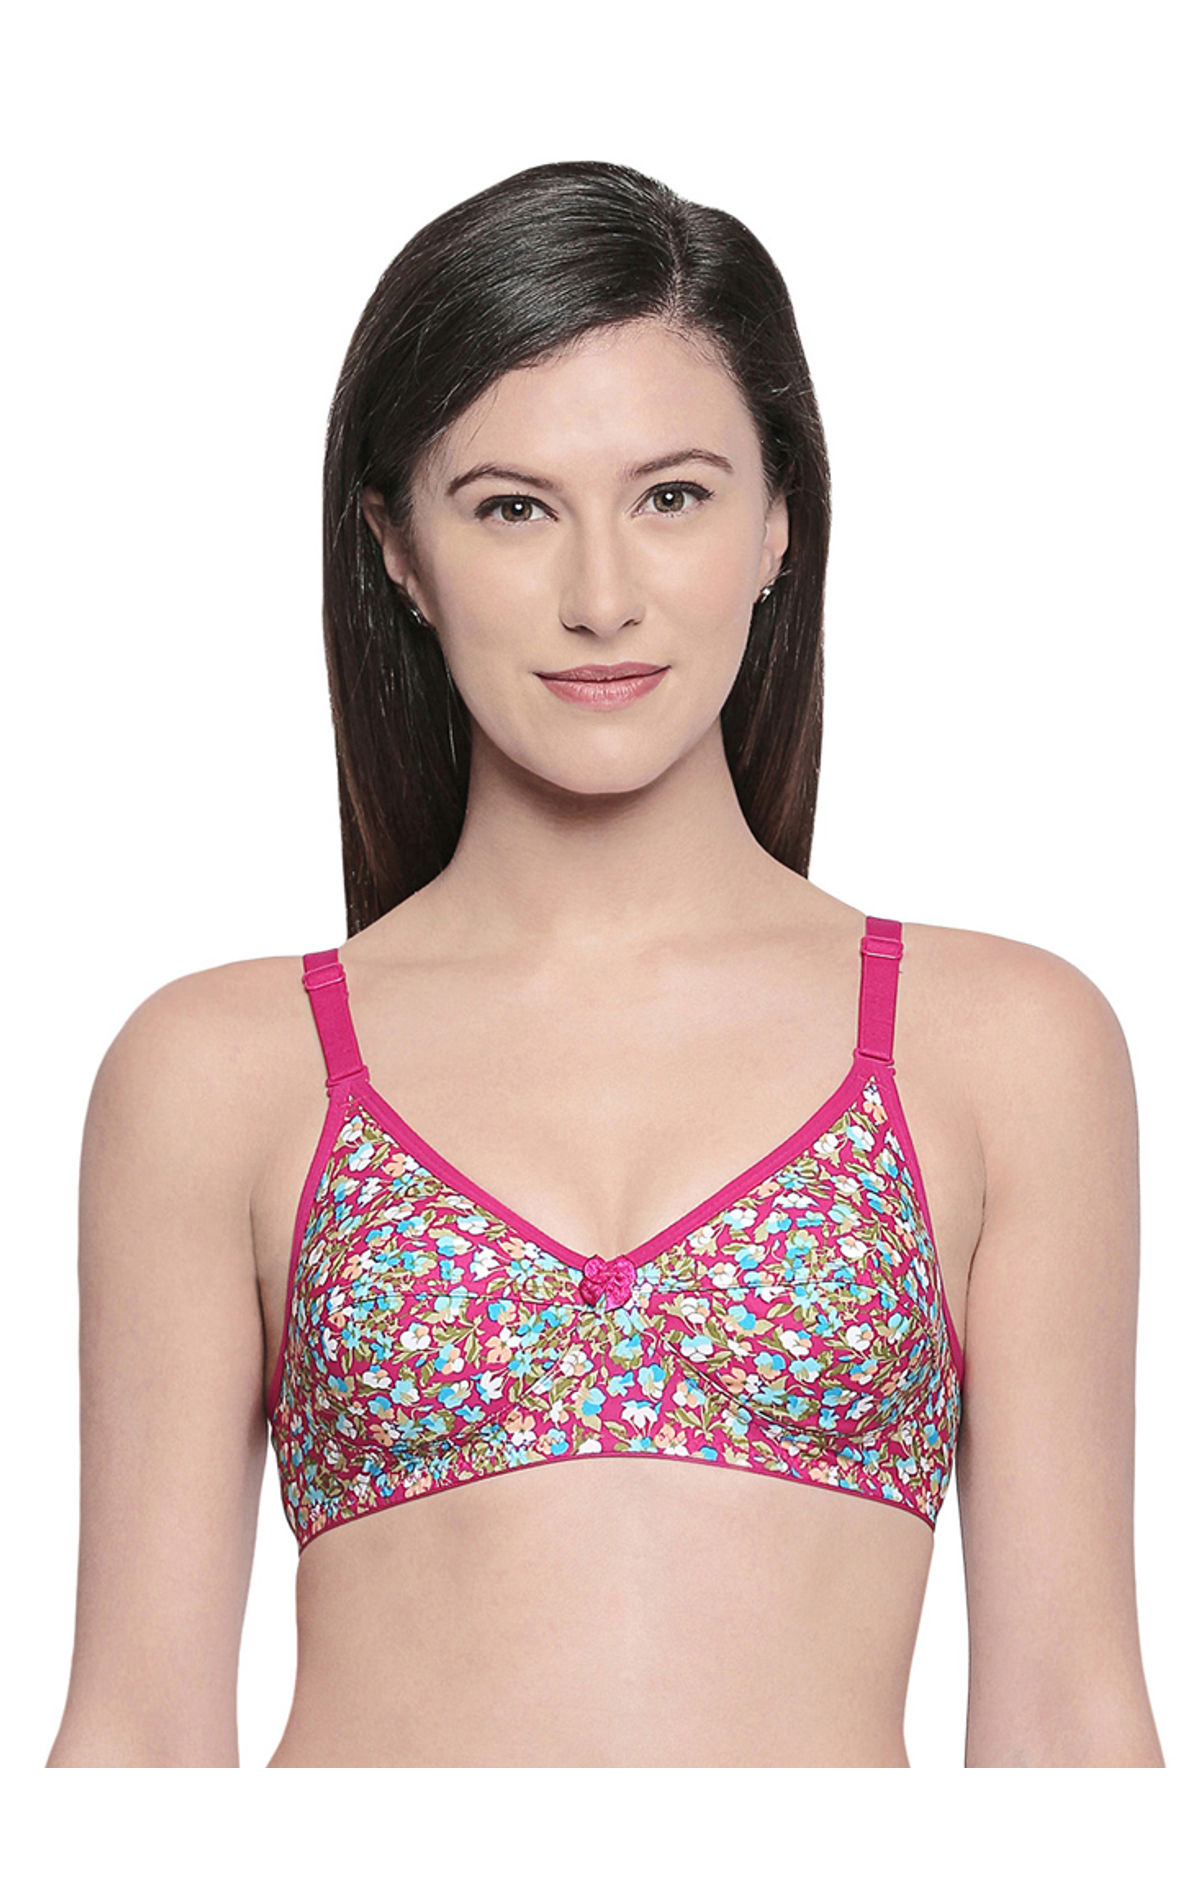 Colour Bra - Get Best Price from Manufacturers & Suppliers in India